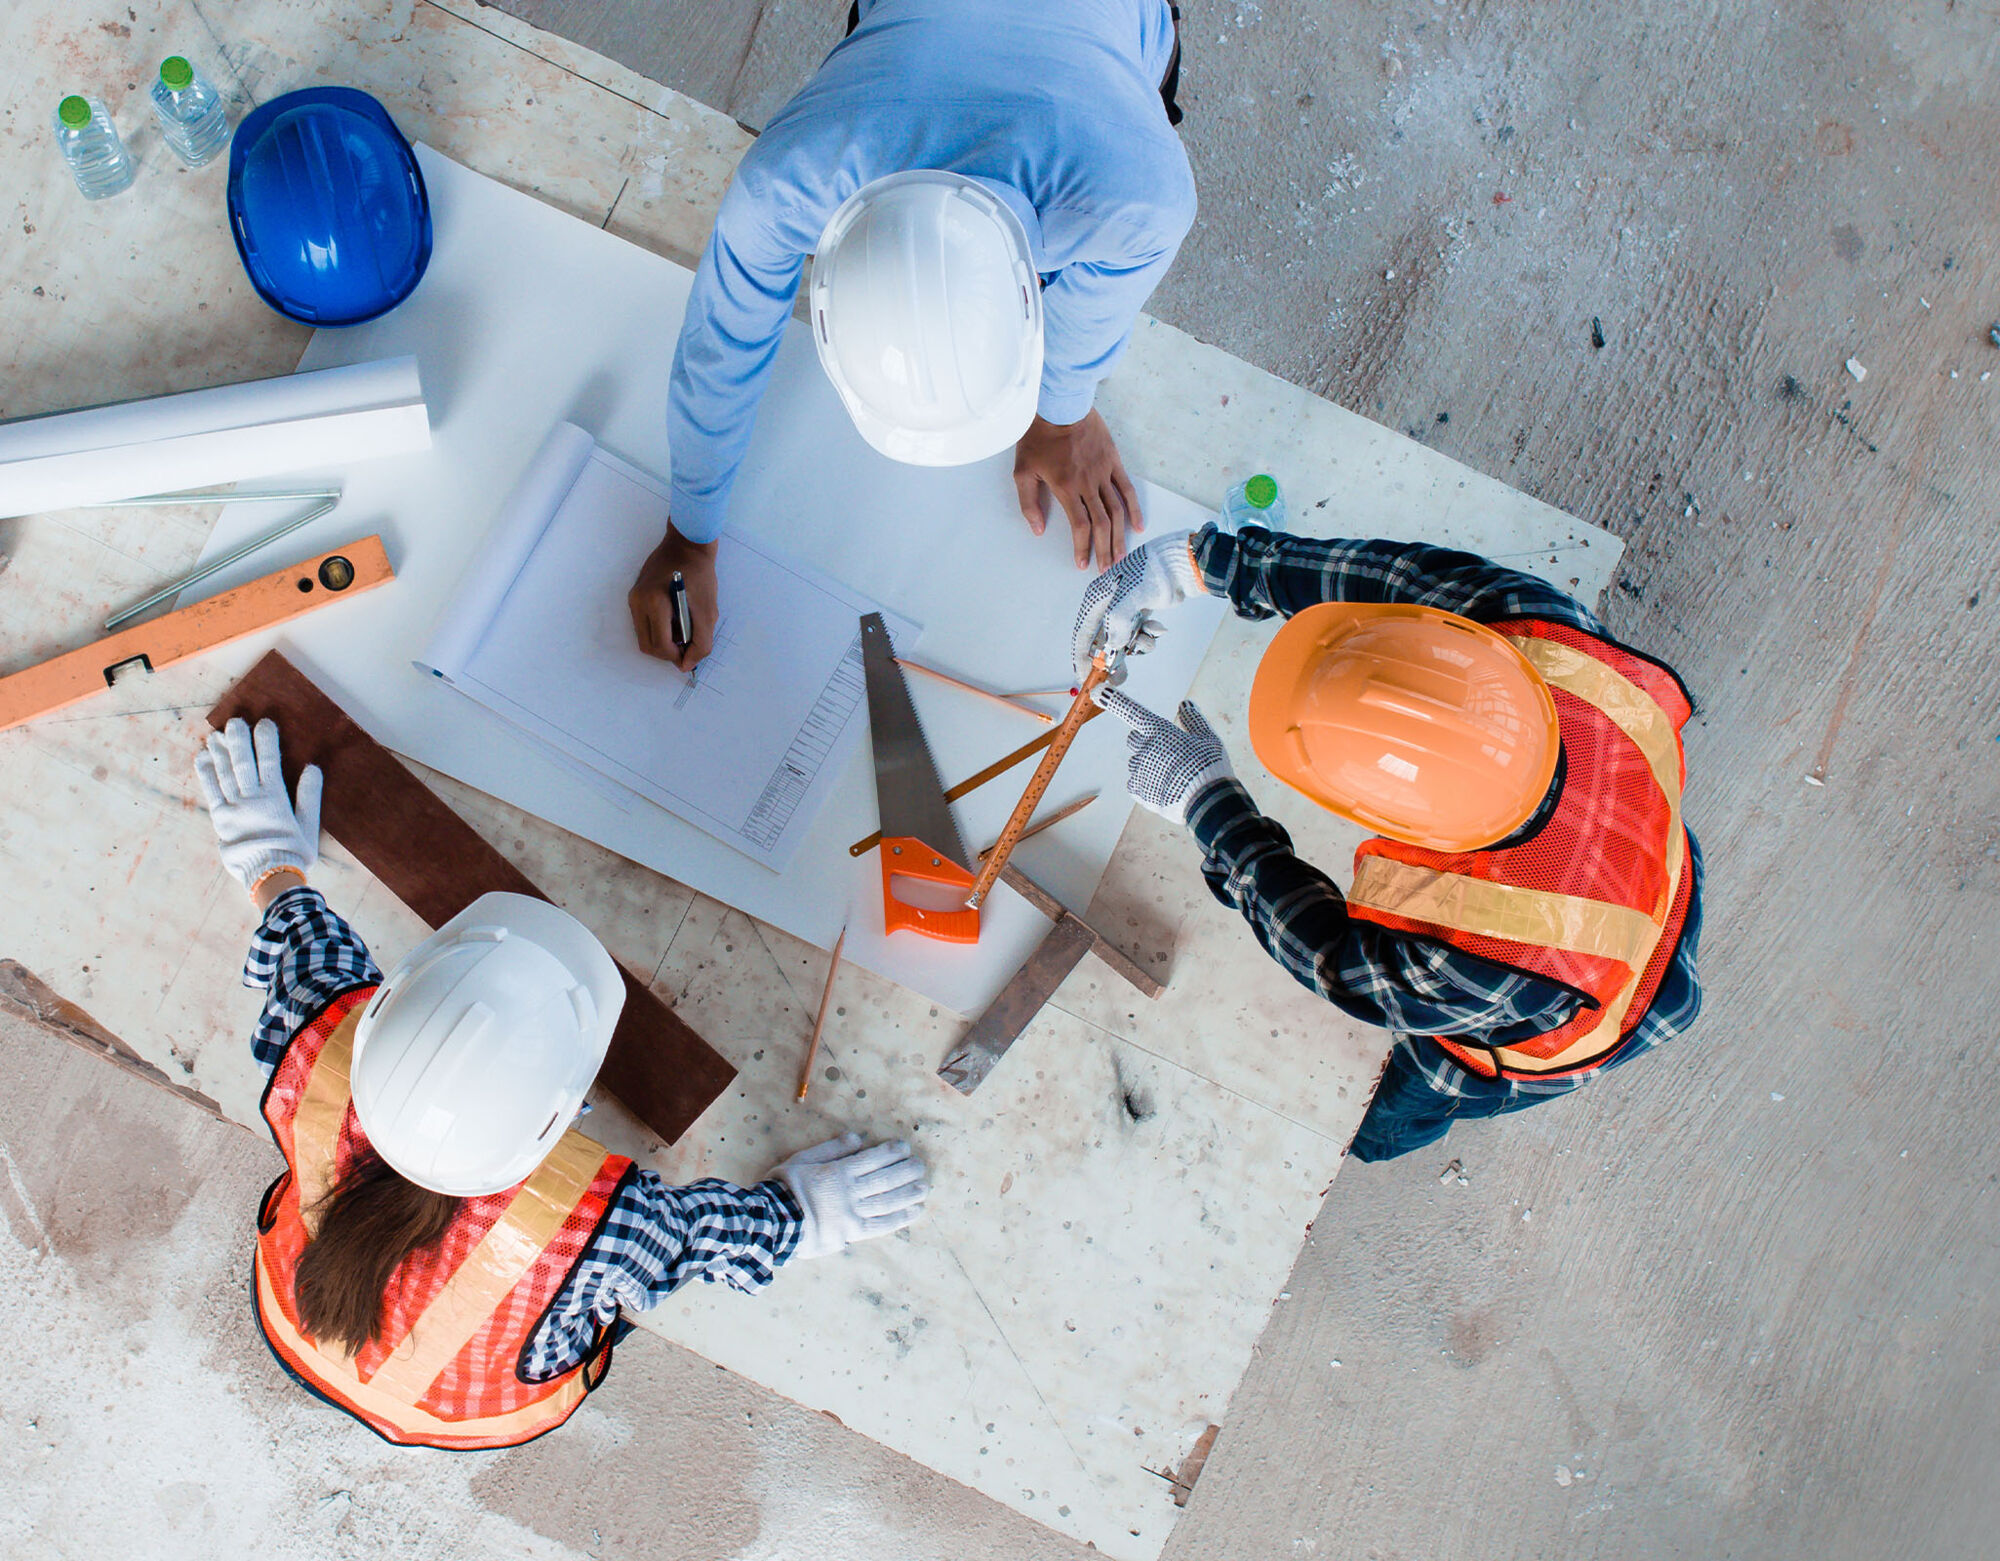 Three construction workers crowd over a notebook and have a discussion that involves using measuring instruments.